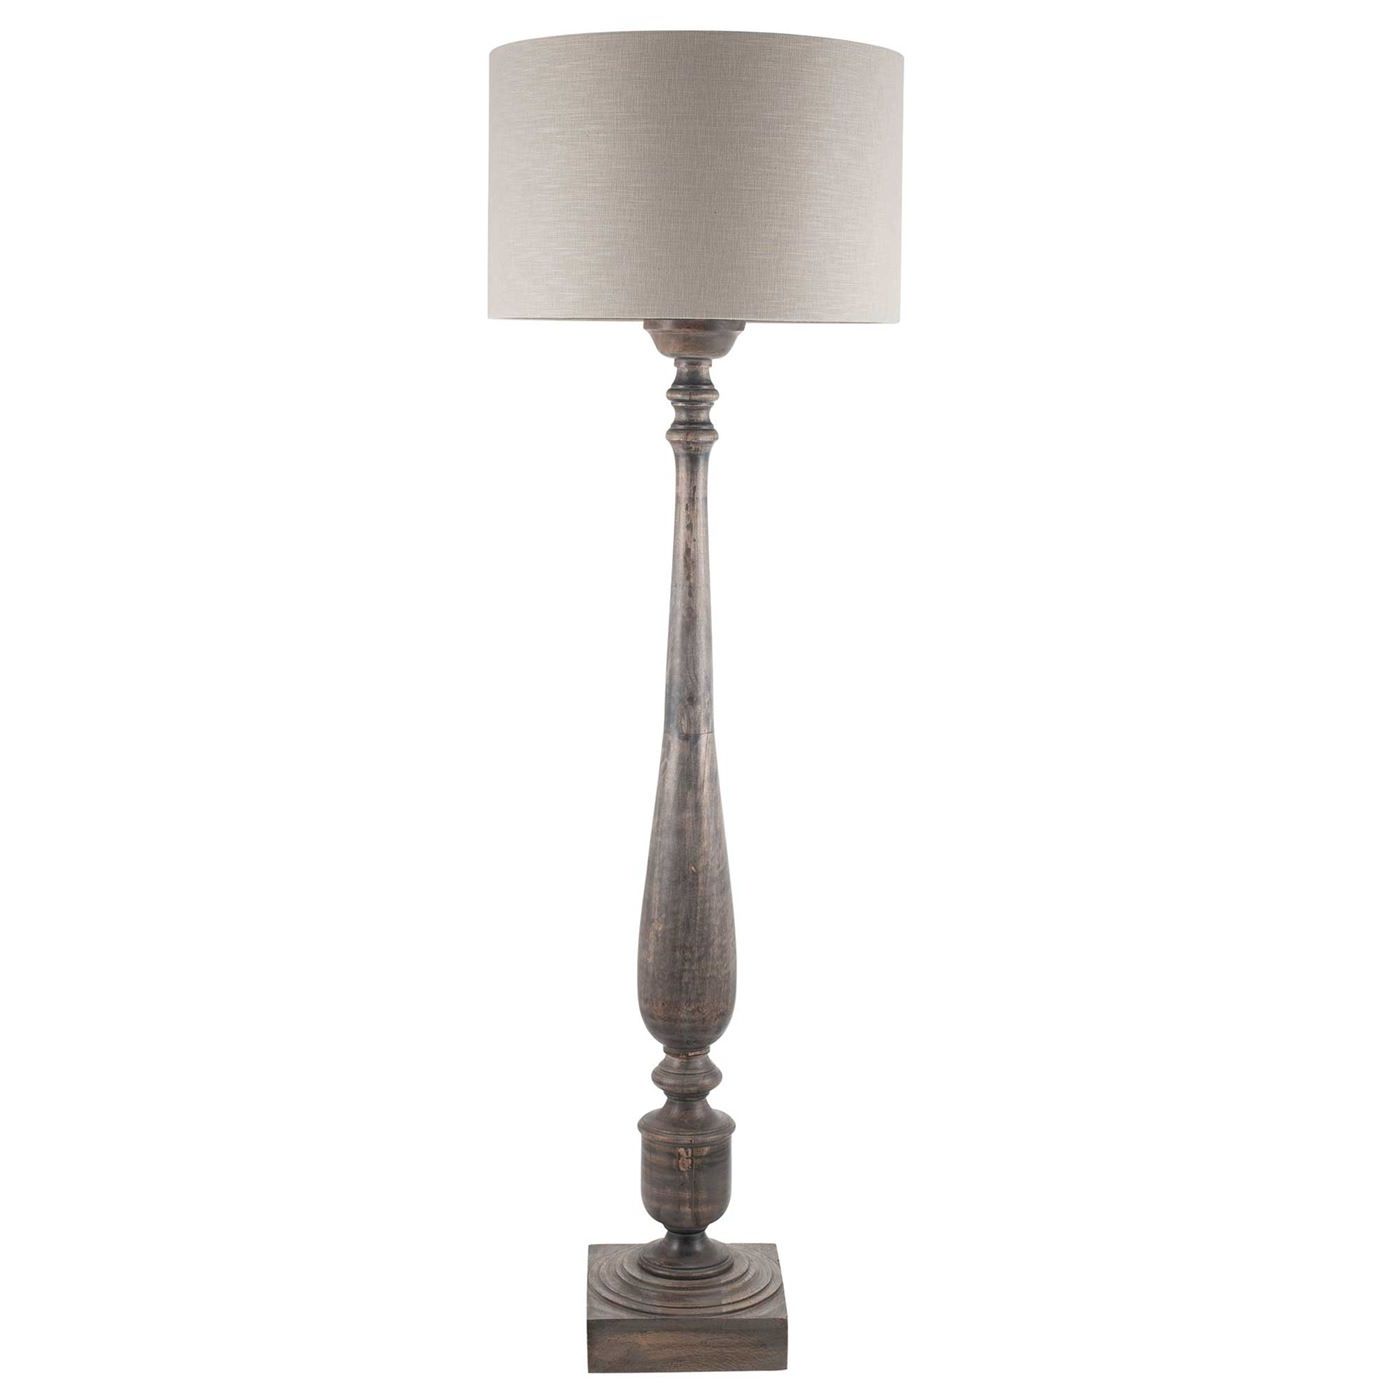 Mango Wood Standing Lamps For Popular Floor Lamp Tall Mango Wood – Barker & Stonehouse (View 5 of 15)